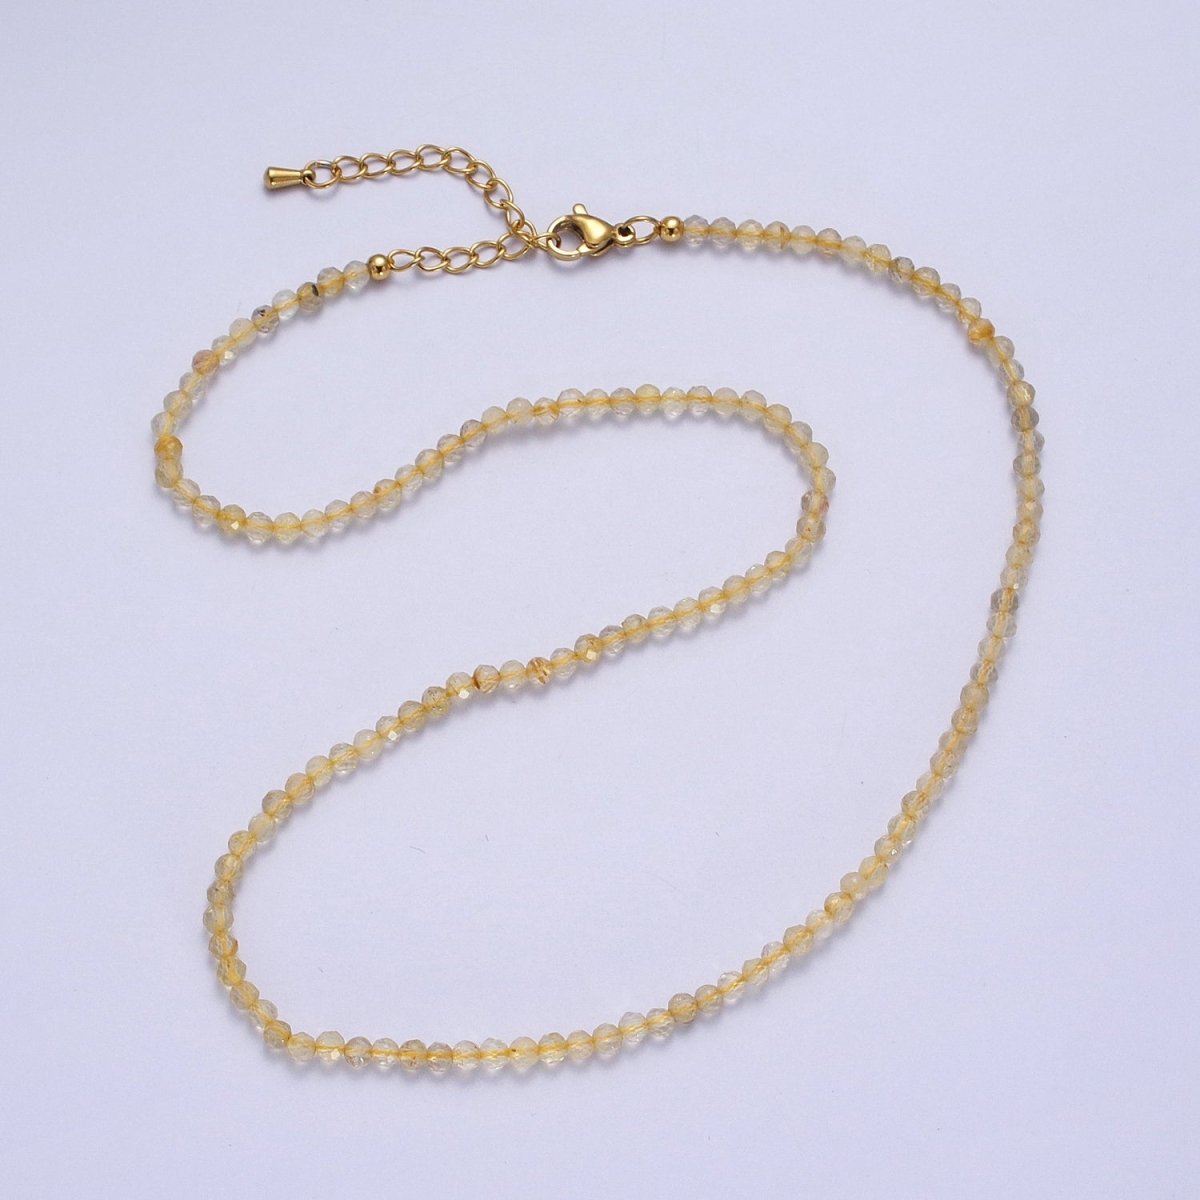 16 Inch Multifaceted 2.8mm Matte Gemstone Bead Necklace | WA-1469 - WA-1478 Clearance Pricing - DLUXCA